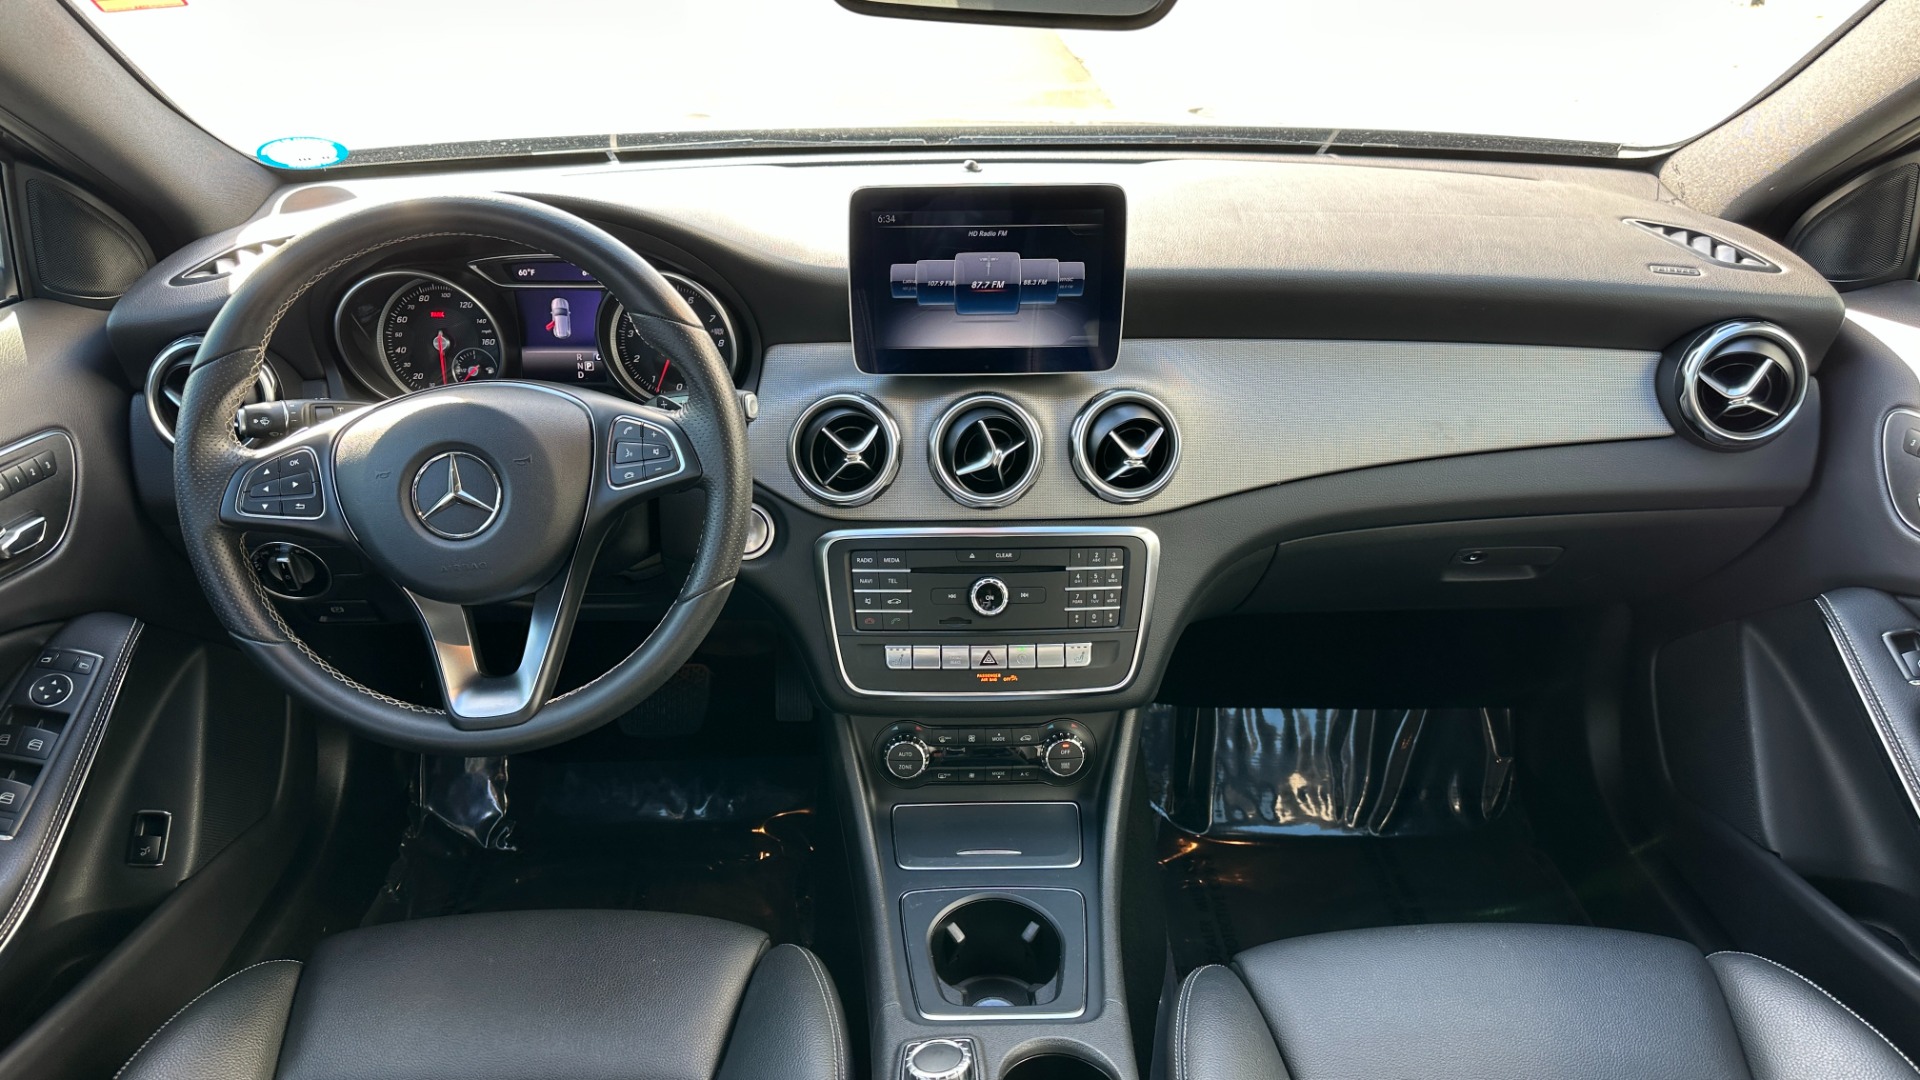 Used 2018 Mercedes-Benz GLA GLA 250 / PANORAMIC SUNROOF / BLIND SPOT ASSIST / HEATED FRONT SEATS for sale $27,999 at Formula Imports in Charlotte NC 28227 24